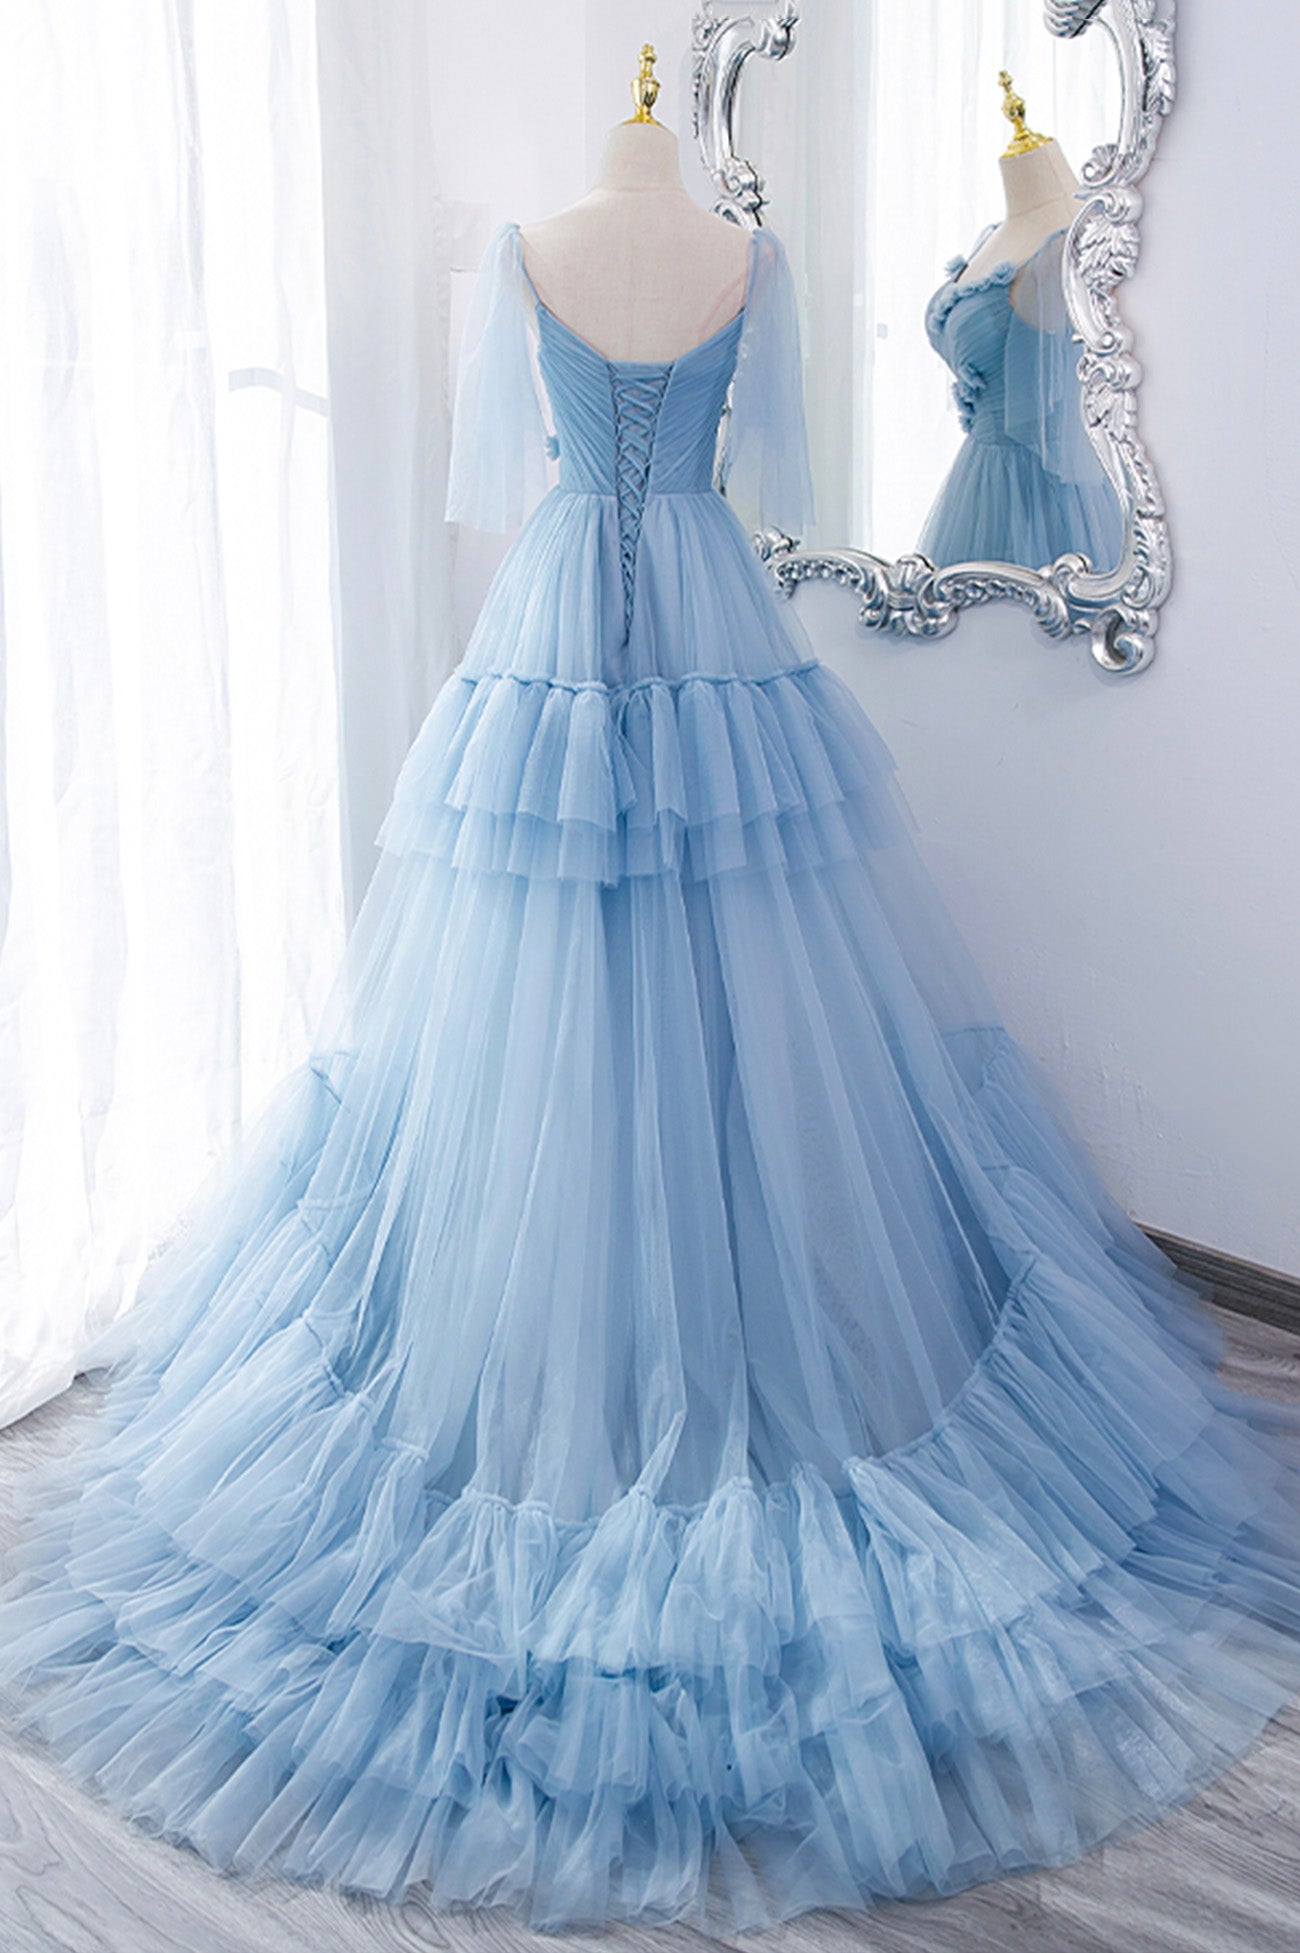 Blue V-Neck Tulle Long Prom Dress, A-Line Evening Party Dress